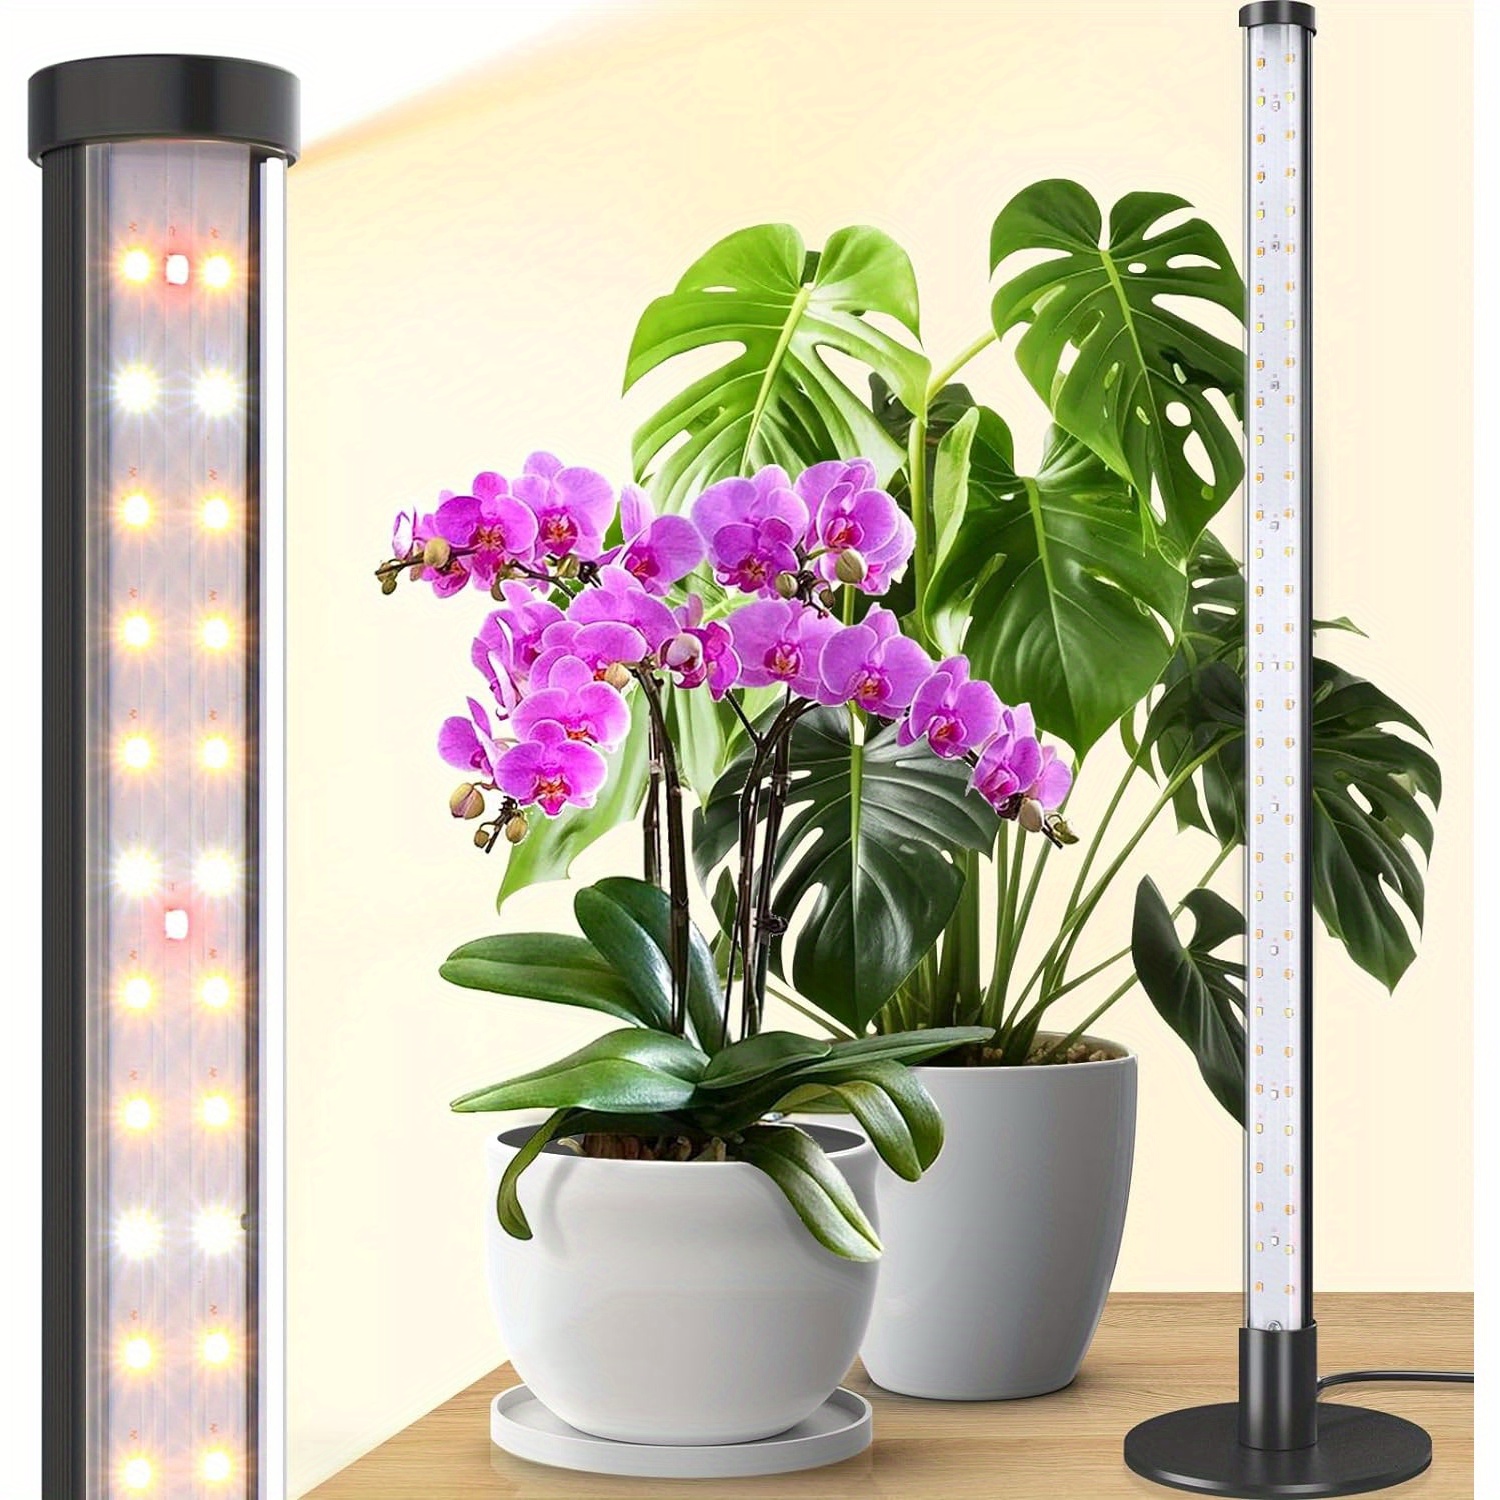 

T10 Vertical Grow Light, 20w 2ft Desk Led Plant Light, Hanging And Standing, Table Top Full Spectrum Grow Lights For Indoor Plants With Stand And On/off Switch, Ideal For Plants Growth